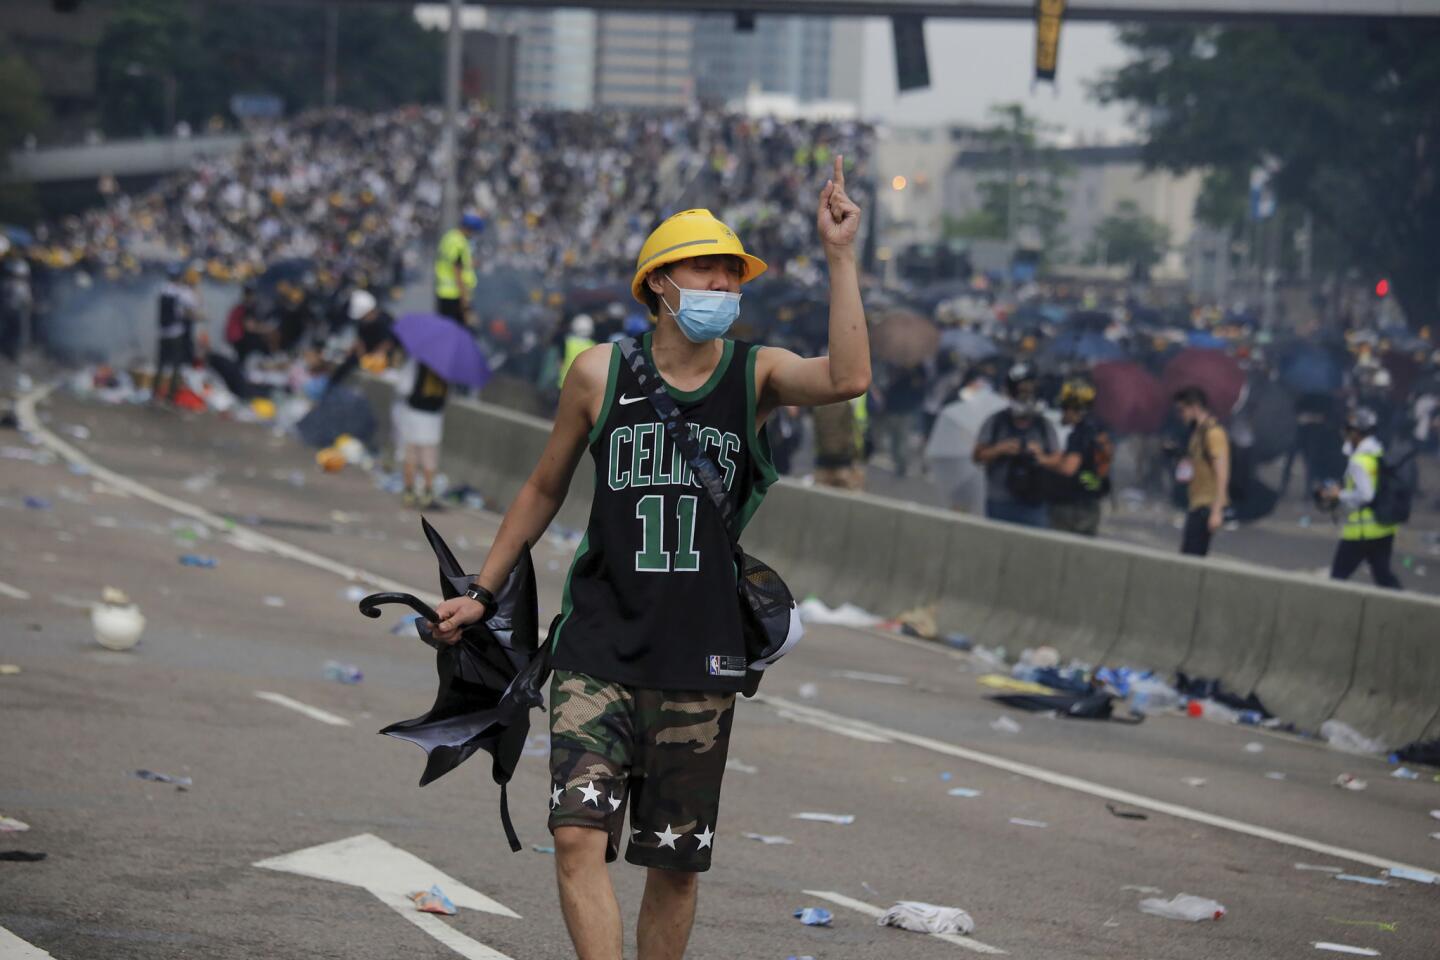 As people massed outside government headquarters in Hong Kong on June 12, violent clashes erupted. Police fired tear gas and rubber bullets at those demonstrating against a proposed extradition bill, which has become a focus among those concerned about greater Chinese control and erosion of civil liberties in Hong Kong.